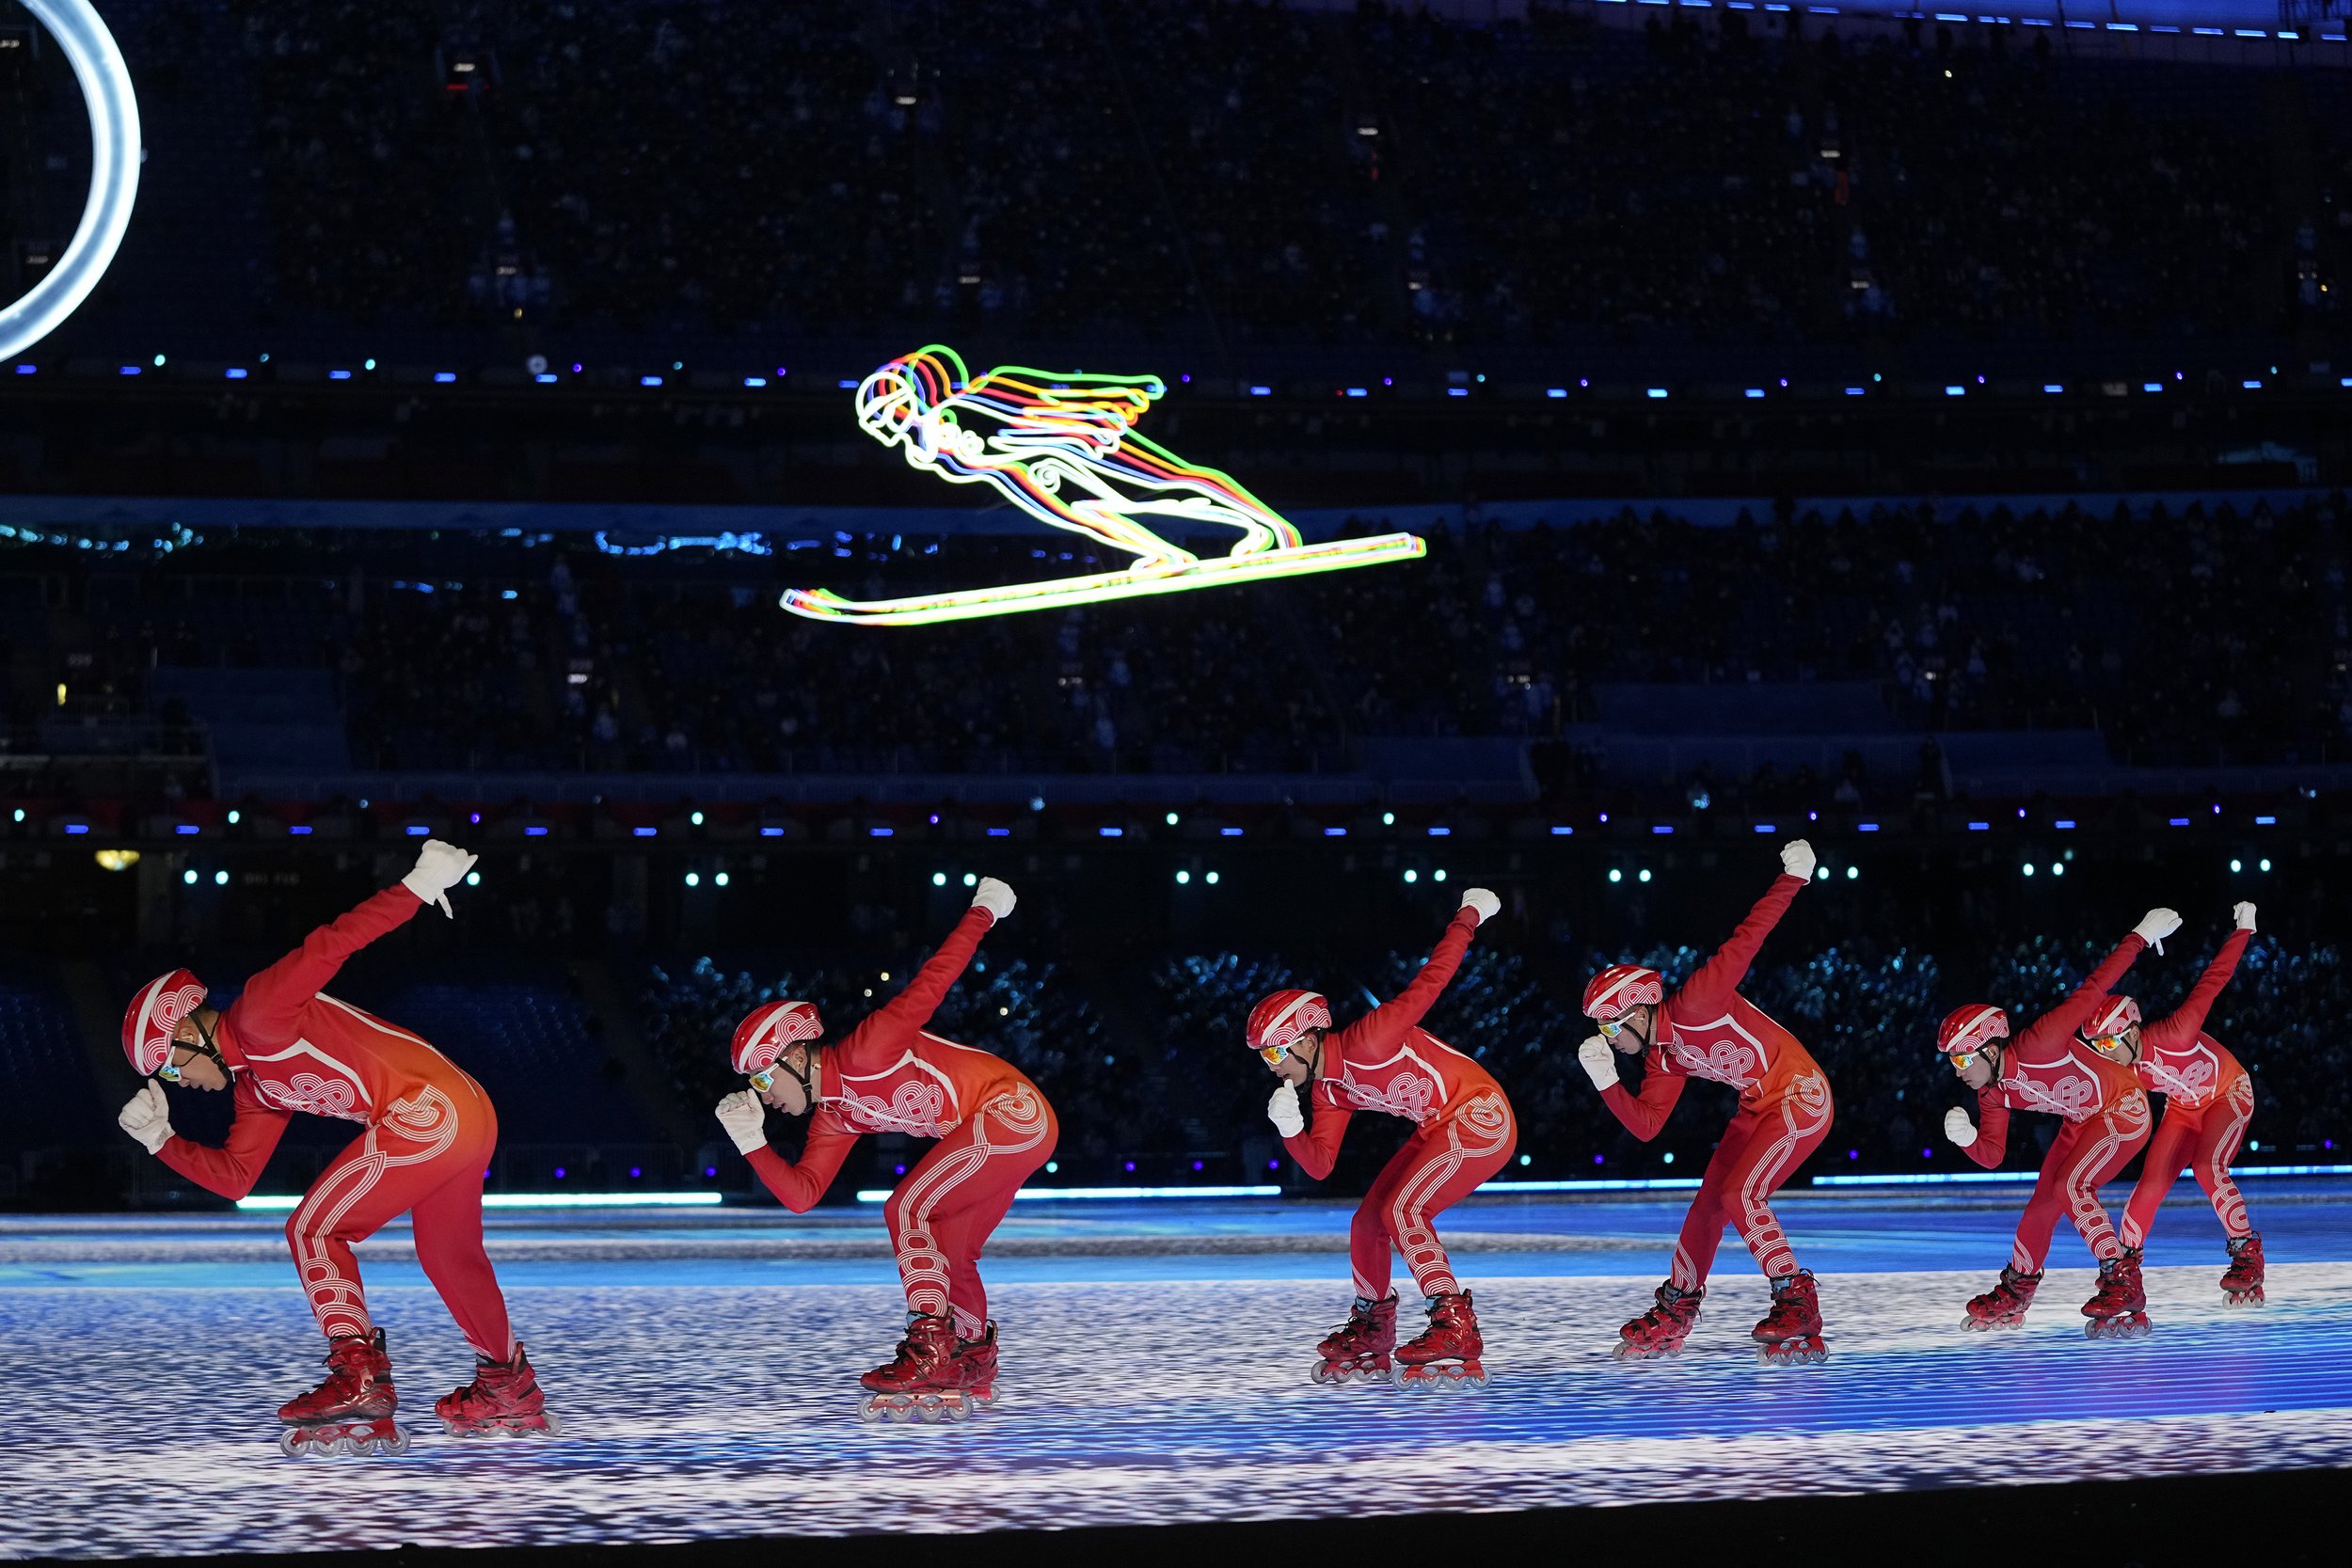  Performers participate during the opening ceremony of the 2022 Winter Olympics, Friday, Feb. 4, 2022, in Beijing. (AP Photo/Jae C. Hong) 